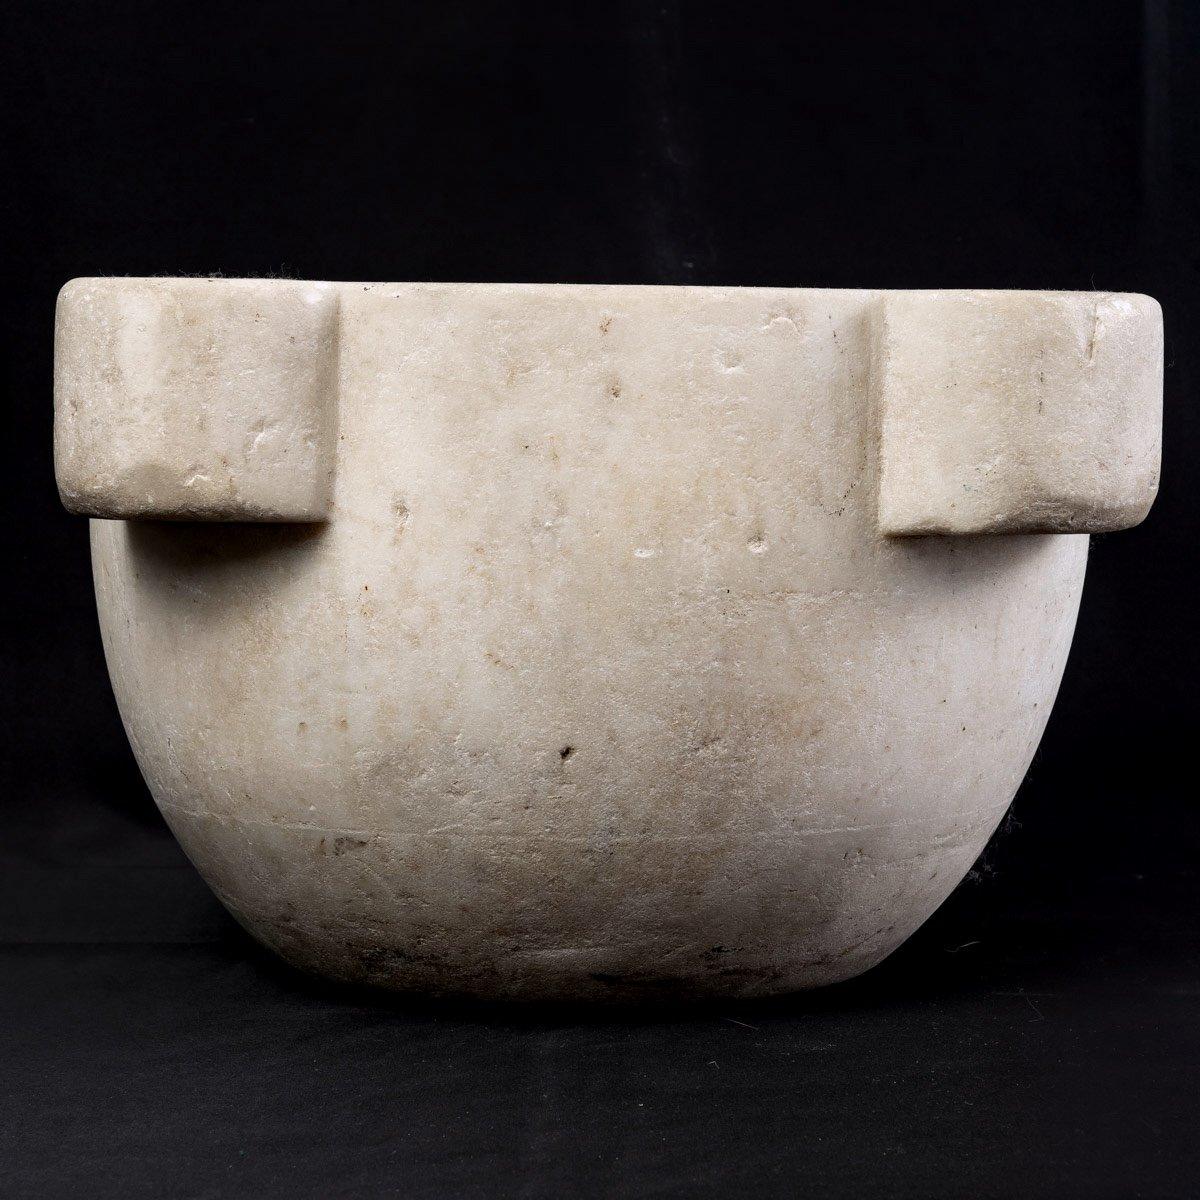 A rare Greek marble pharmacy mortar from Thassos, an original and ancient work.
The patina and veining of the marble are remarkable.
Thassos marble is a white marble, a natural stone.
Its name is inspired by the Greek island of Thassos, the island